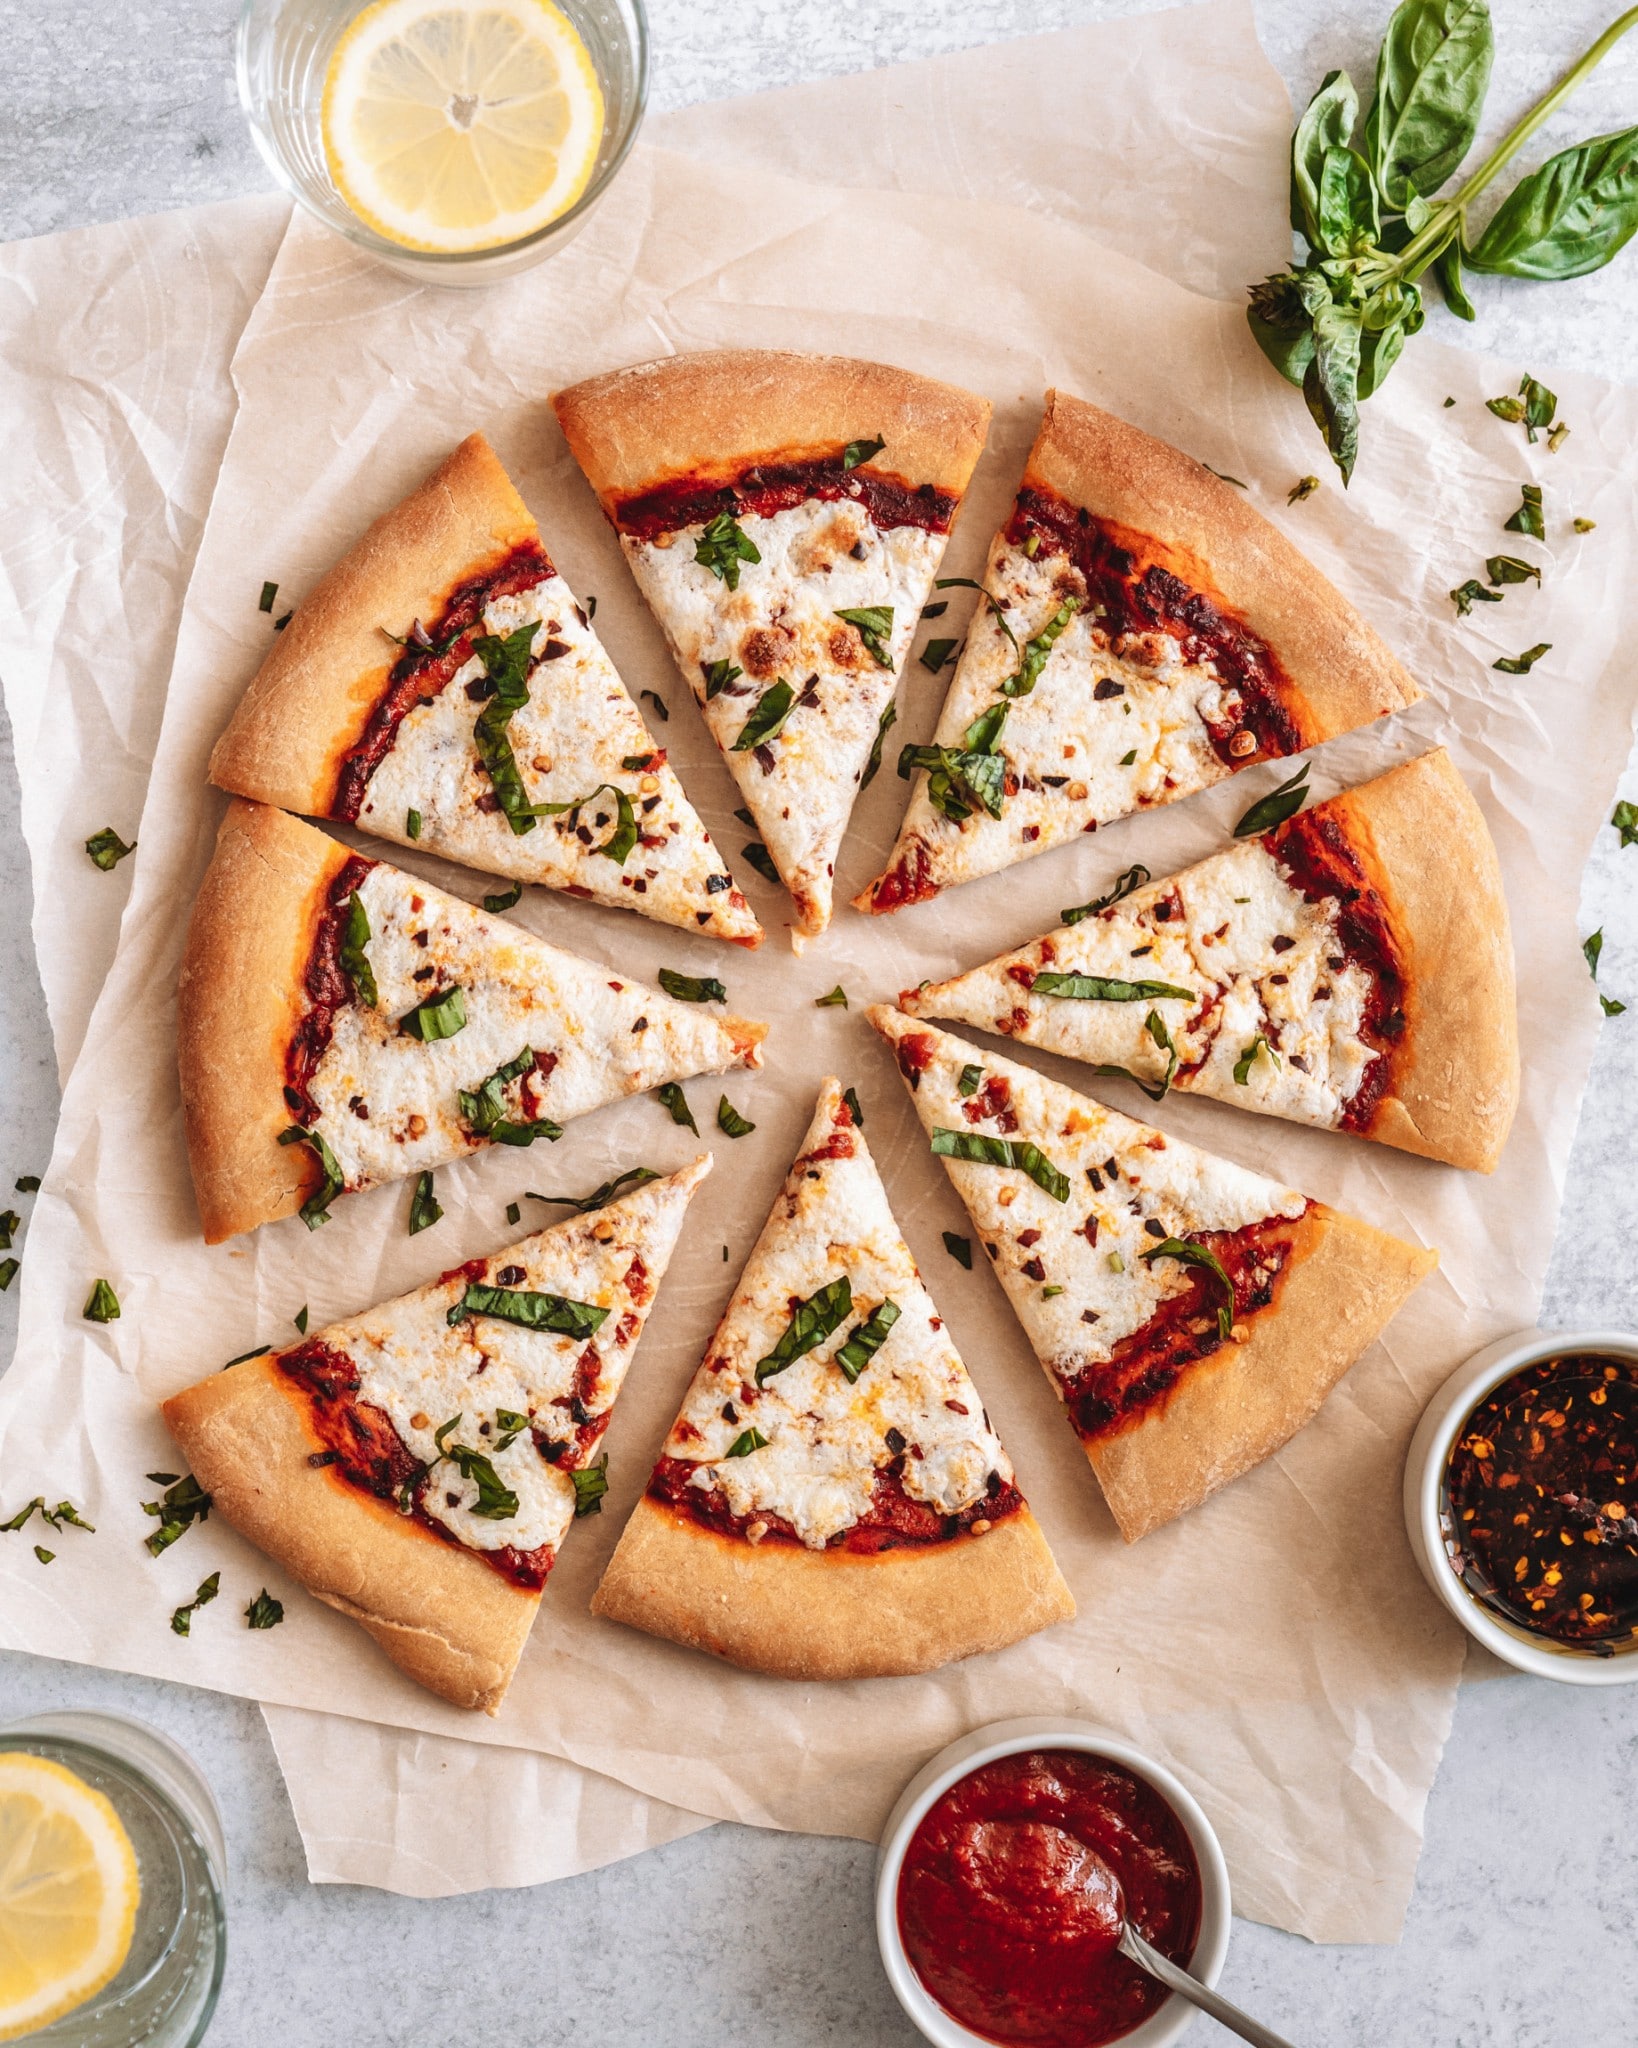 If you’re looking for a vegan pizza recipe that’s simple to make and oh-so-delicious, you’re in the right place! This Vegan Margherita Pizza is made with a healthy, homemade whole-wheat crust, and topped with vegan mozzarella, tomatoes, and fresh basil. The classics never go out of style! There’s a reason they’re called classics, after all.